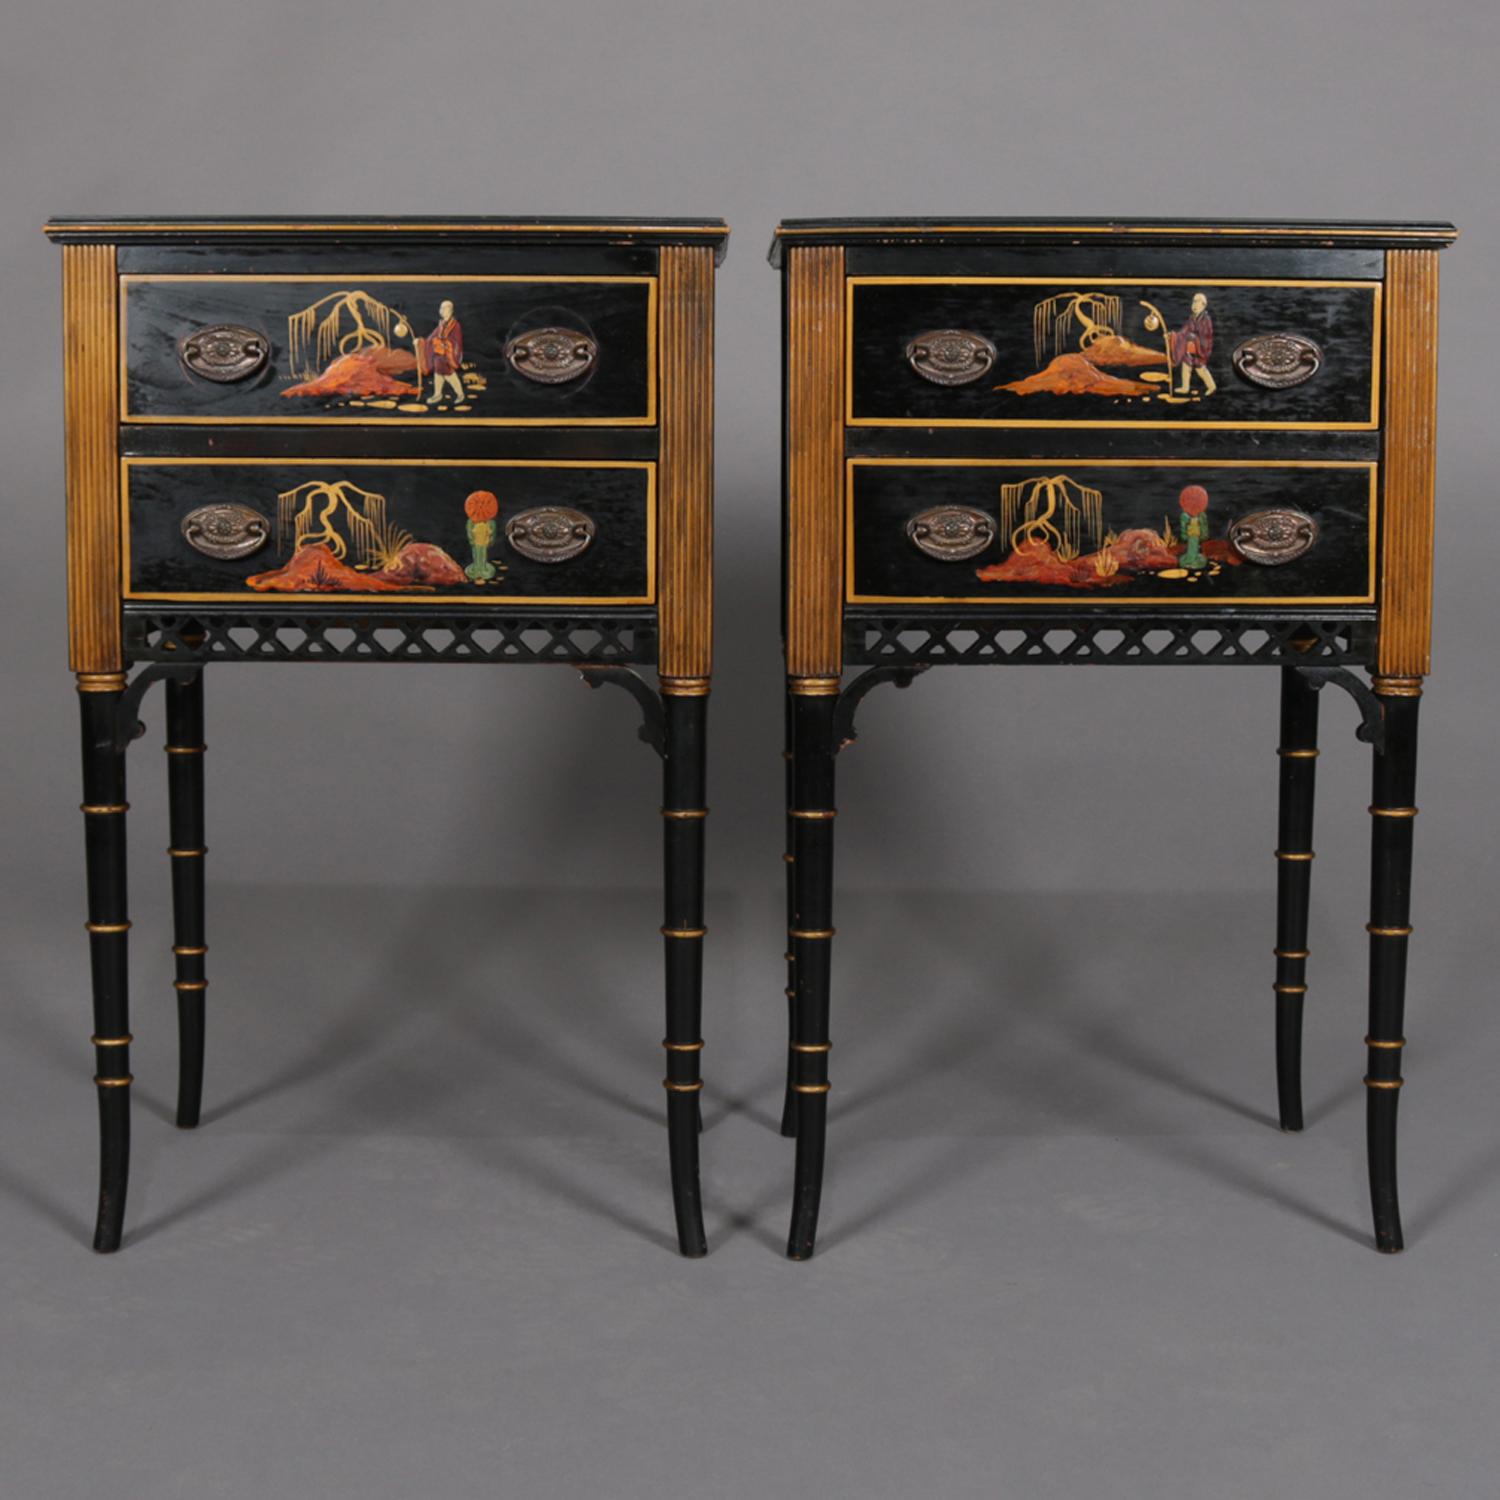 A pair of Chinoiserie decorated end stands feature ebonized cabinets each having two drawers with hand painted scenes including figures in countryside setting surmounting cut-out lattice skirt and raised on stylized bamboo form legs, gilt banding